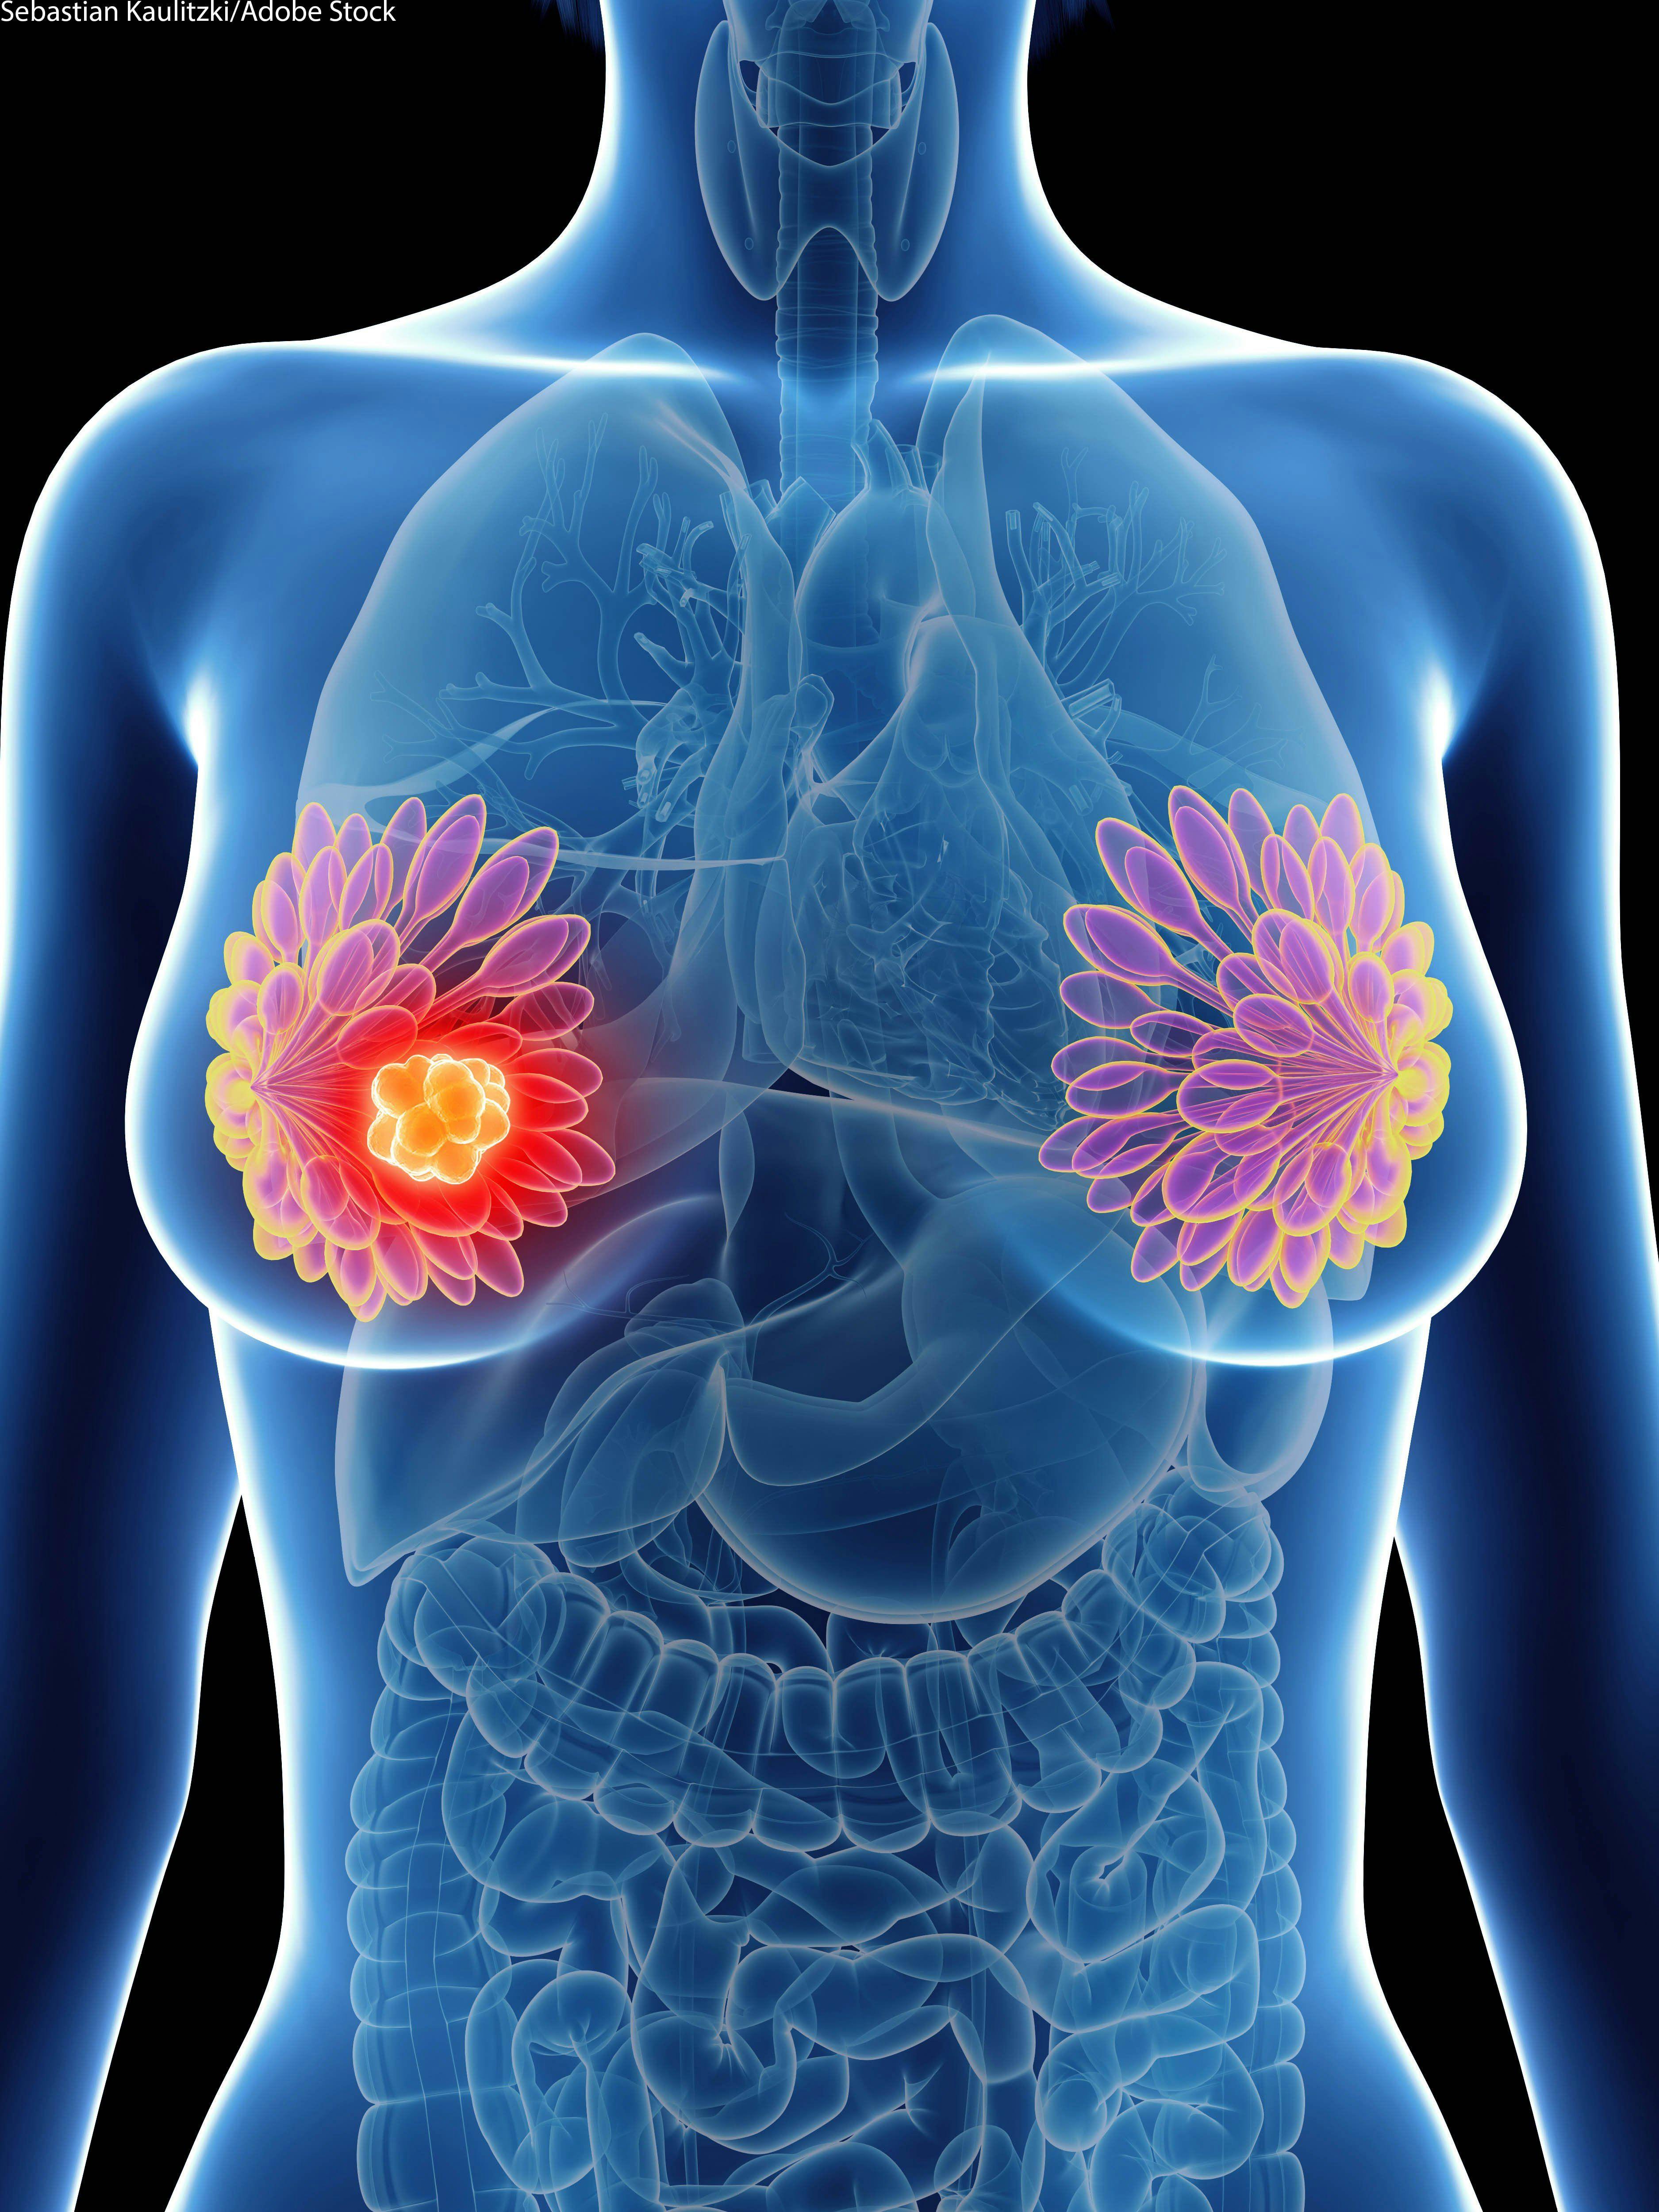 Addition of Abemaciclib to Fulvestrant Improves OS in HR+, HER2- Advanced Breast Cancer